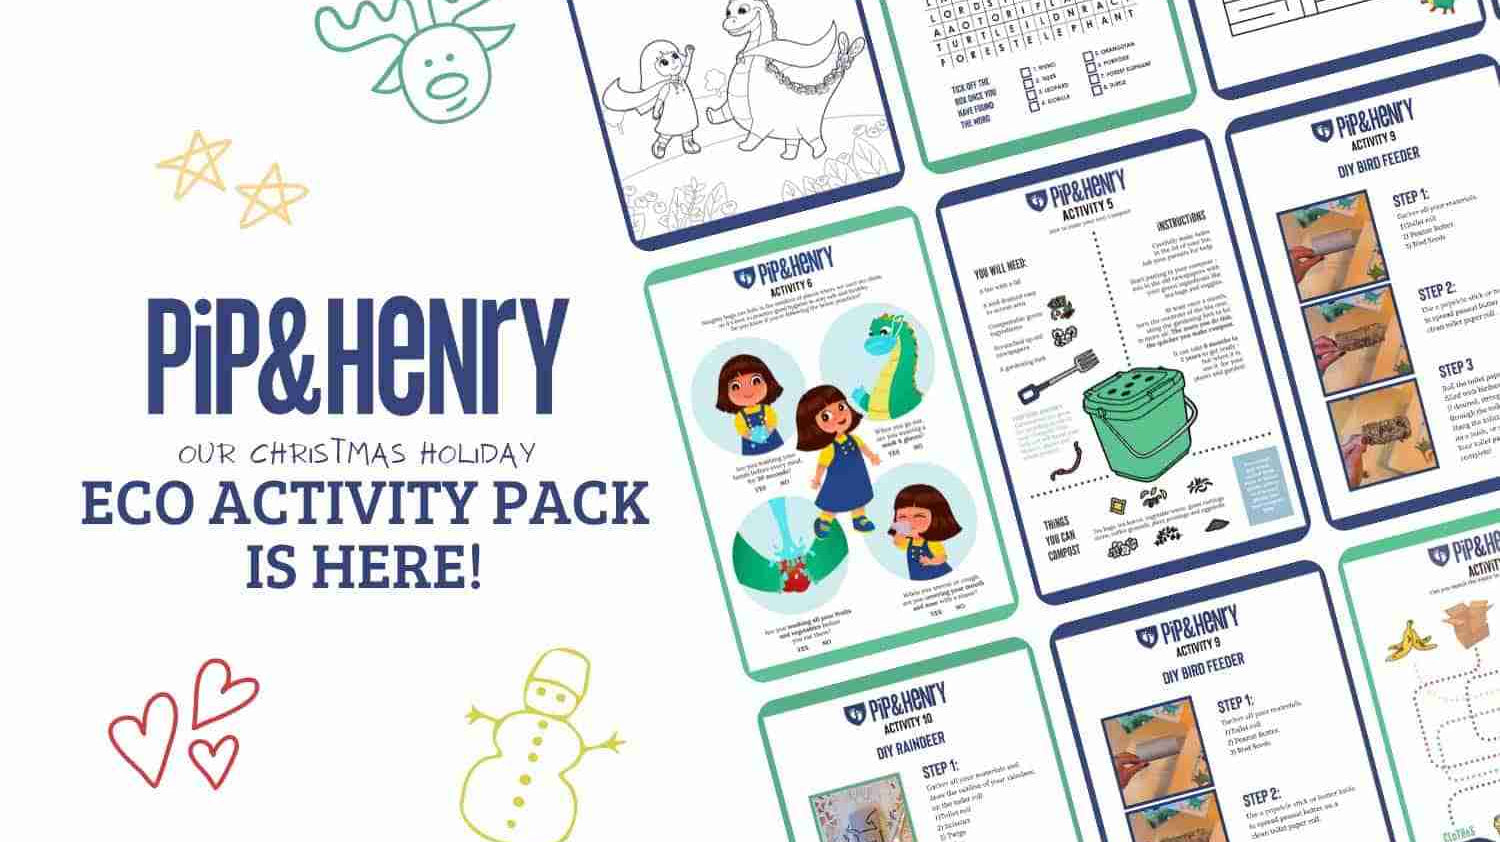 Our Christmas Eco Activity Pack Is Here!